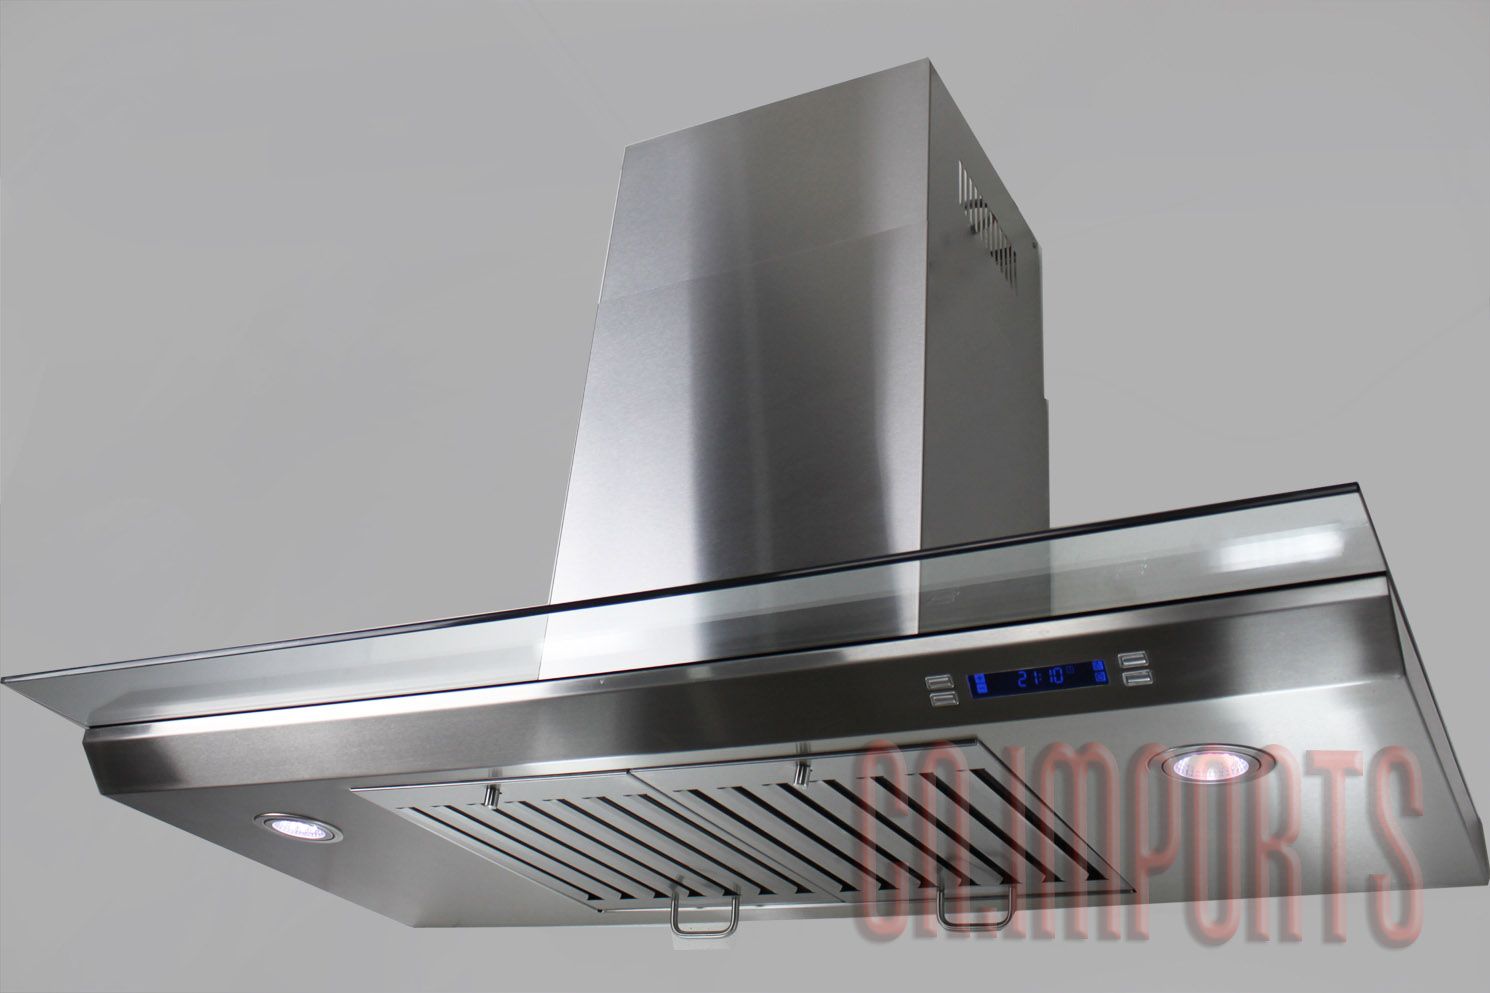 36 Wall Mount Stainless Steel Range Hood Vent C 198KC 36 with Baffle